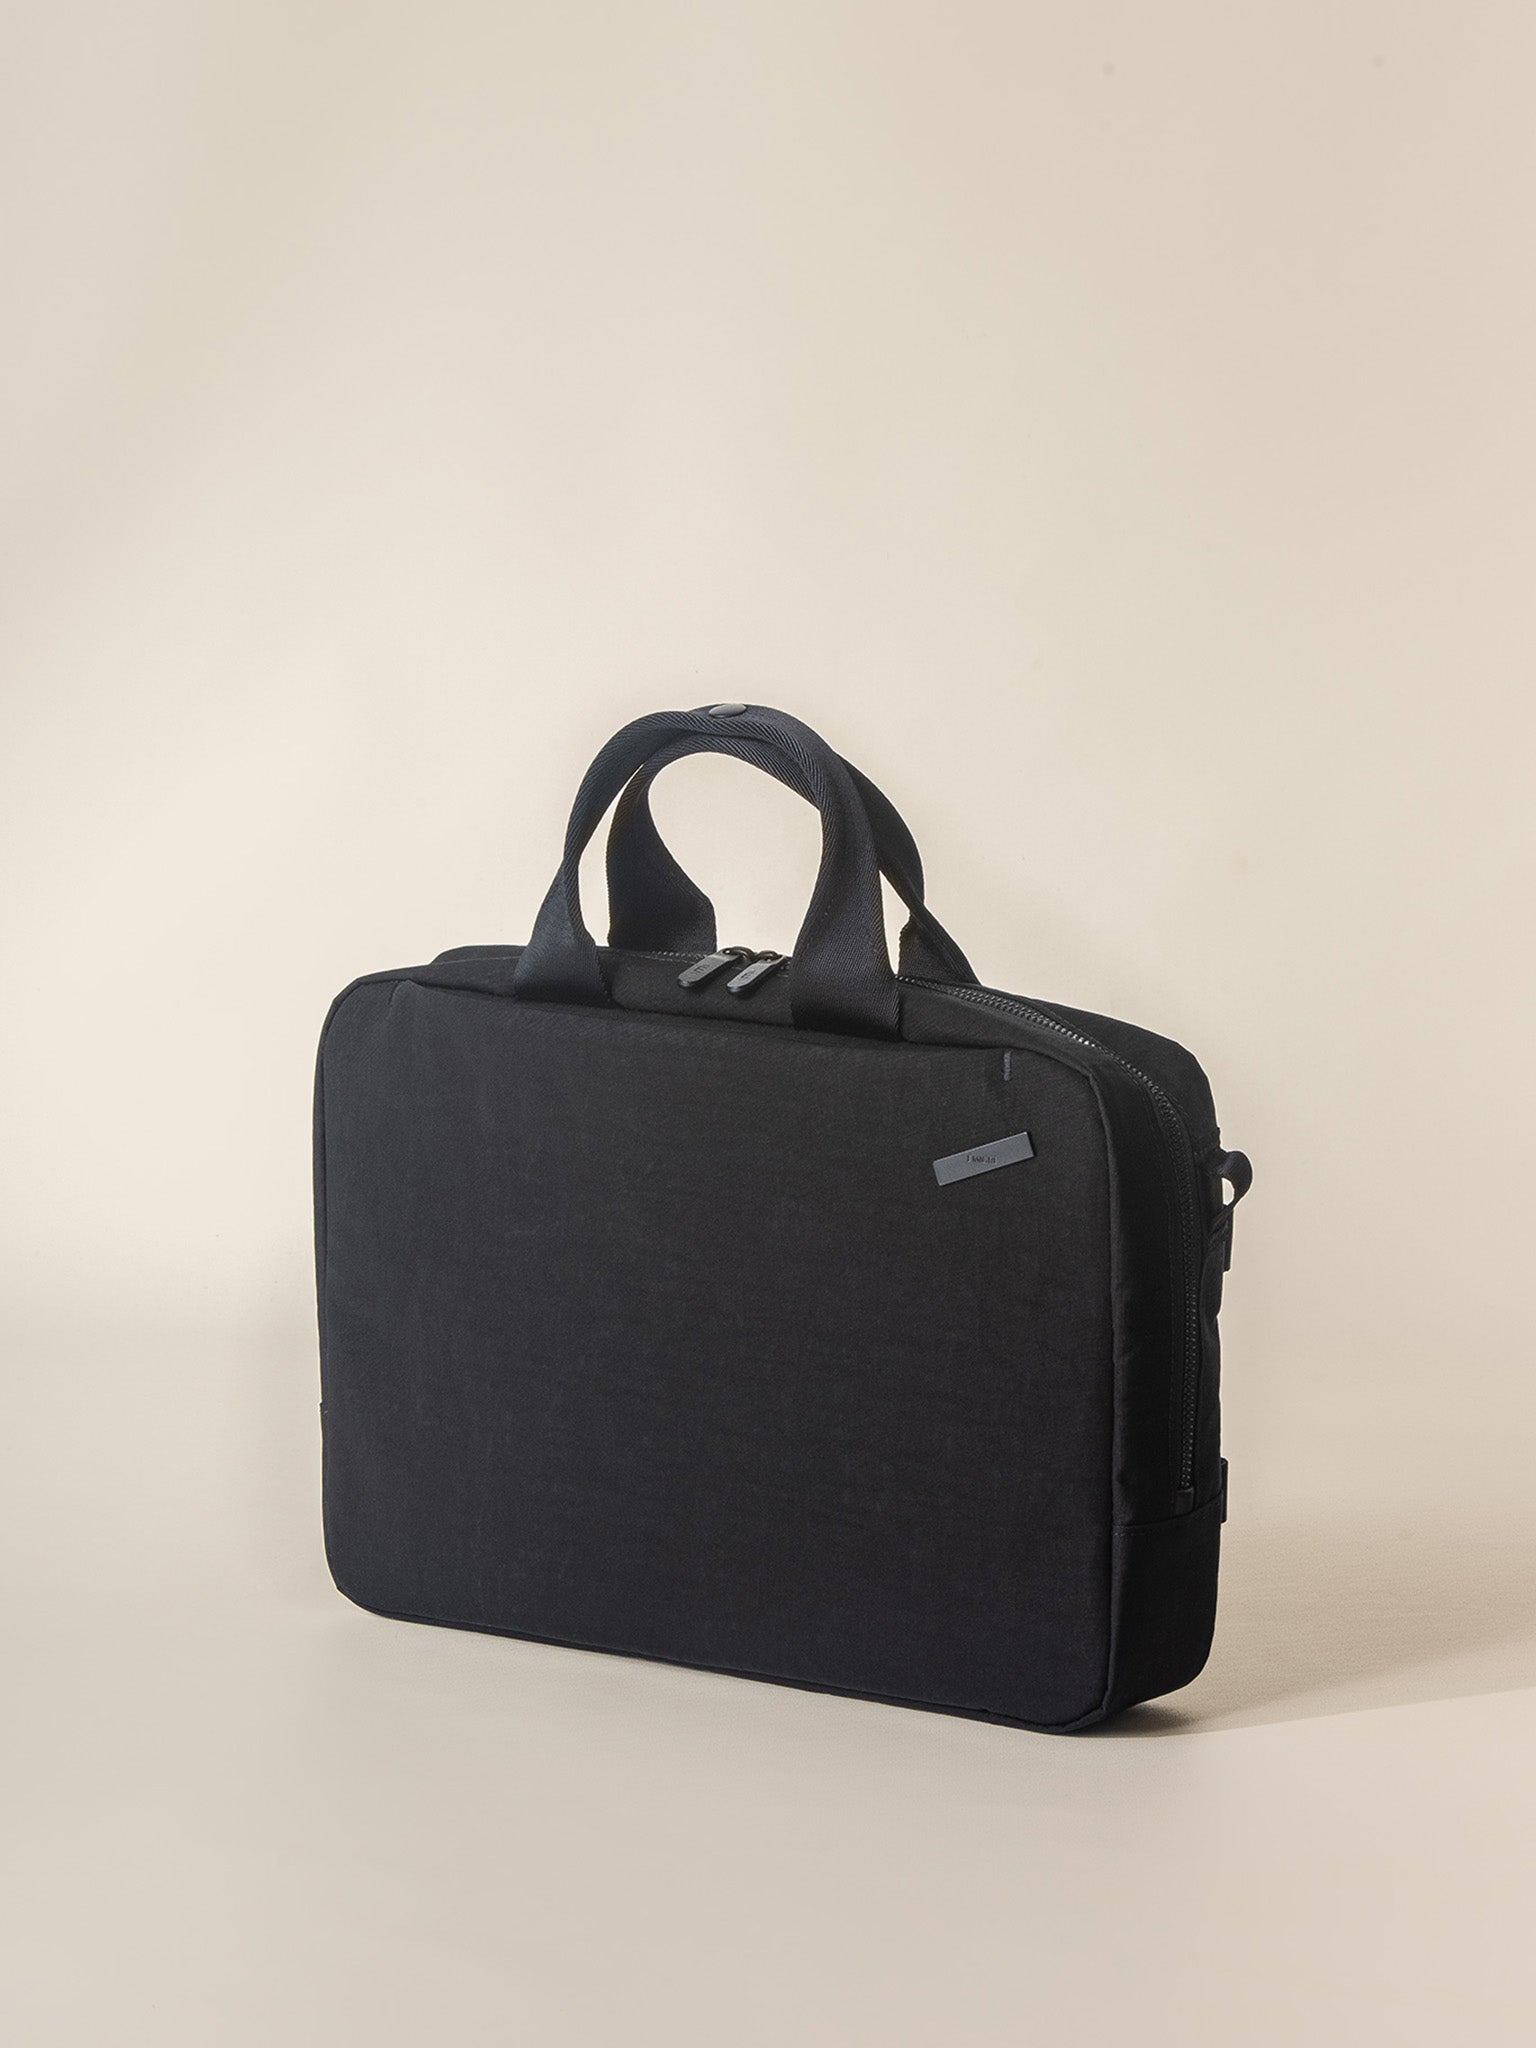 A modern and functional black briefcase for men with a padded laptop compartment.